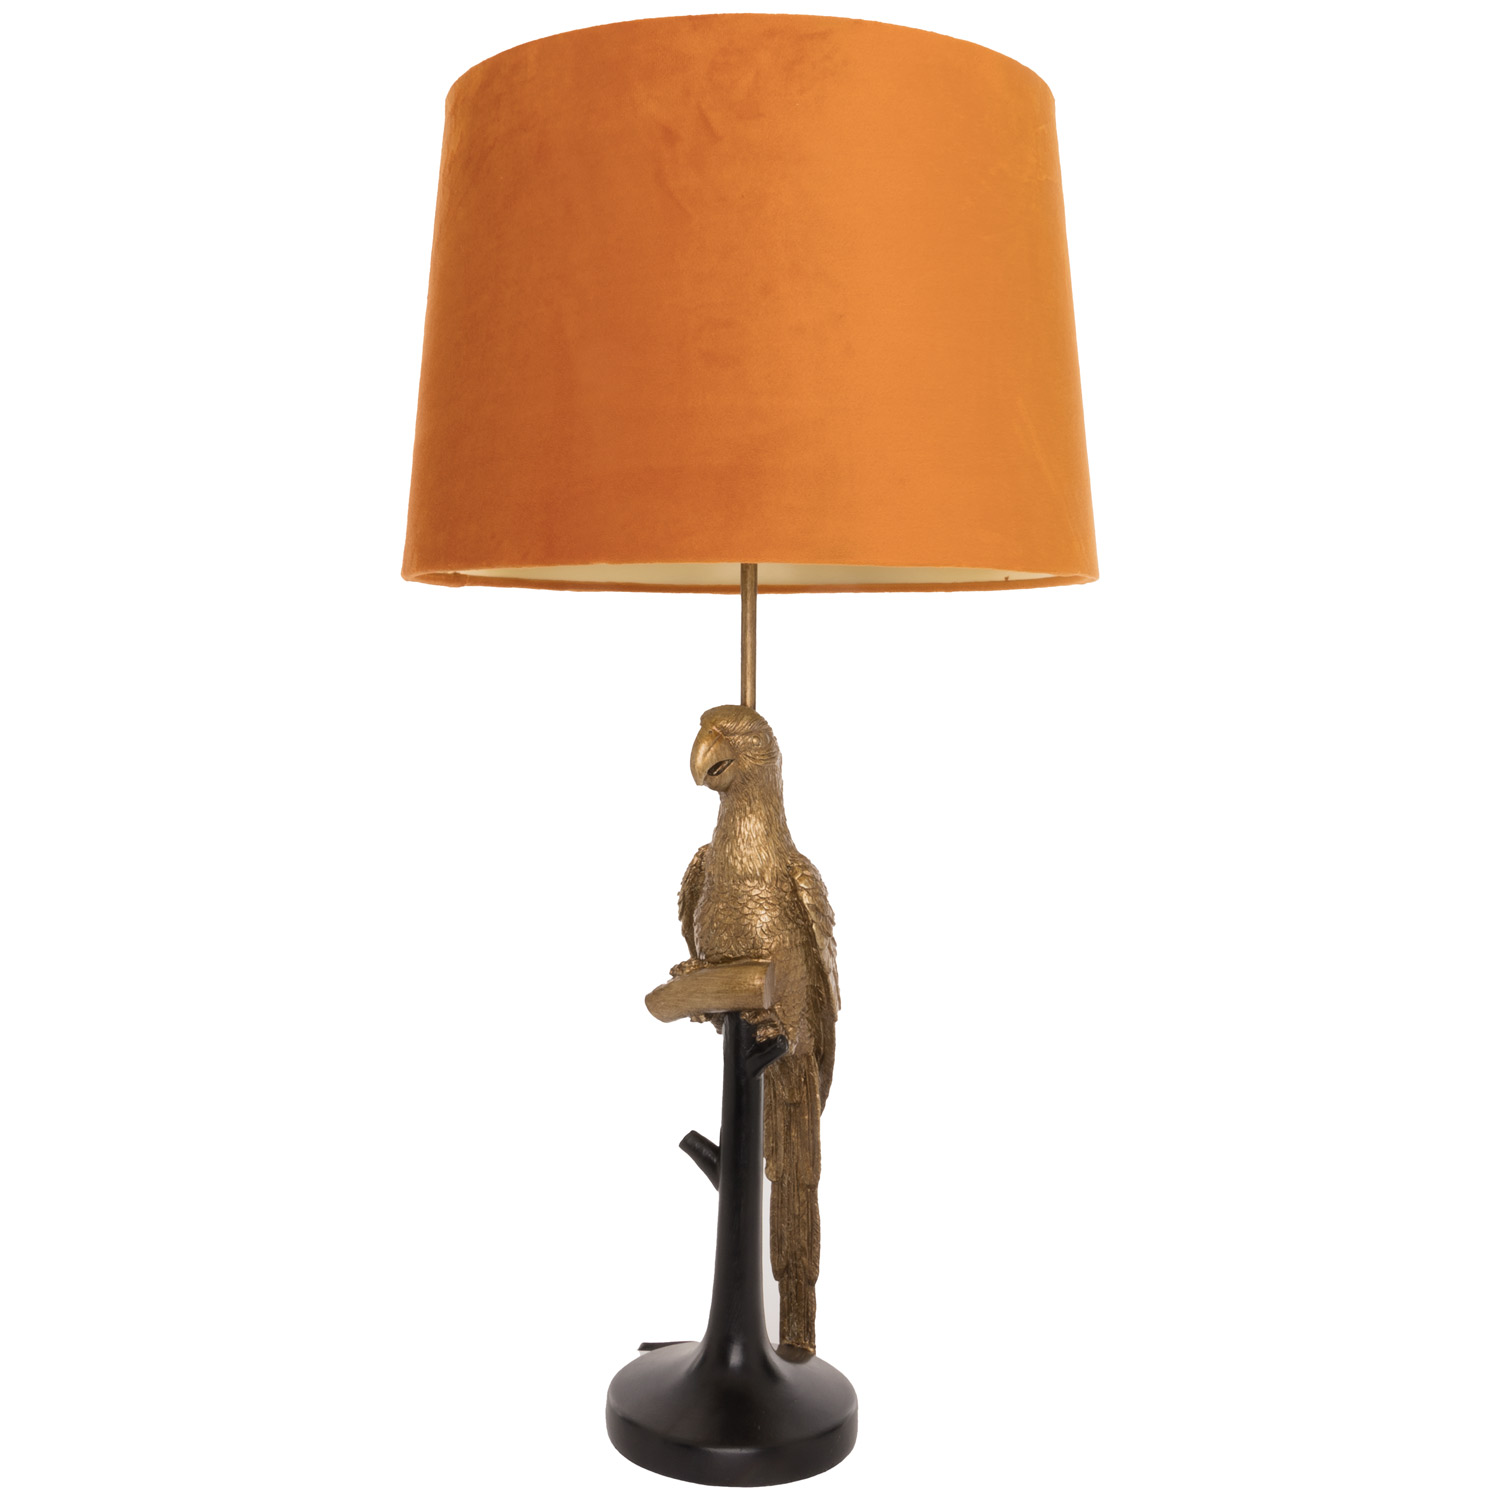 Percy The Parrot Gold And Black Lamp With Burnt Orange Shade